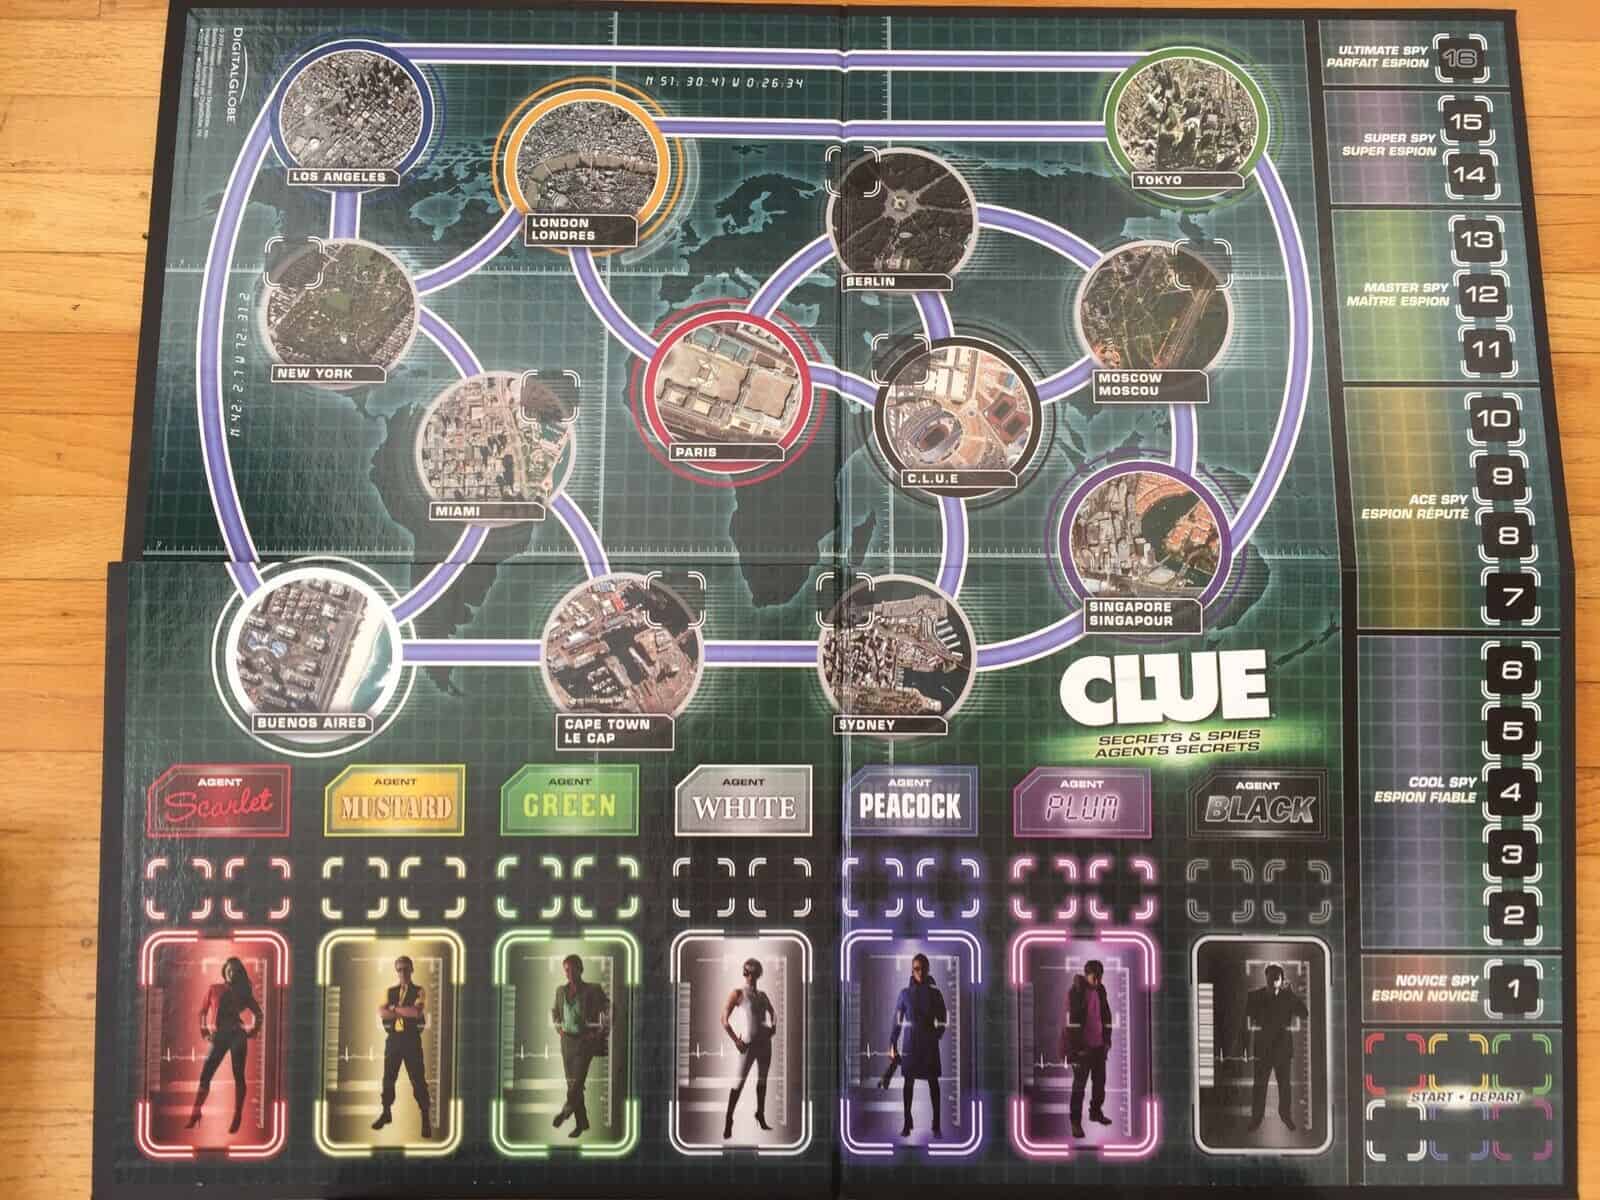 Hasbro A5826079 Clue Game Review